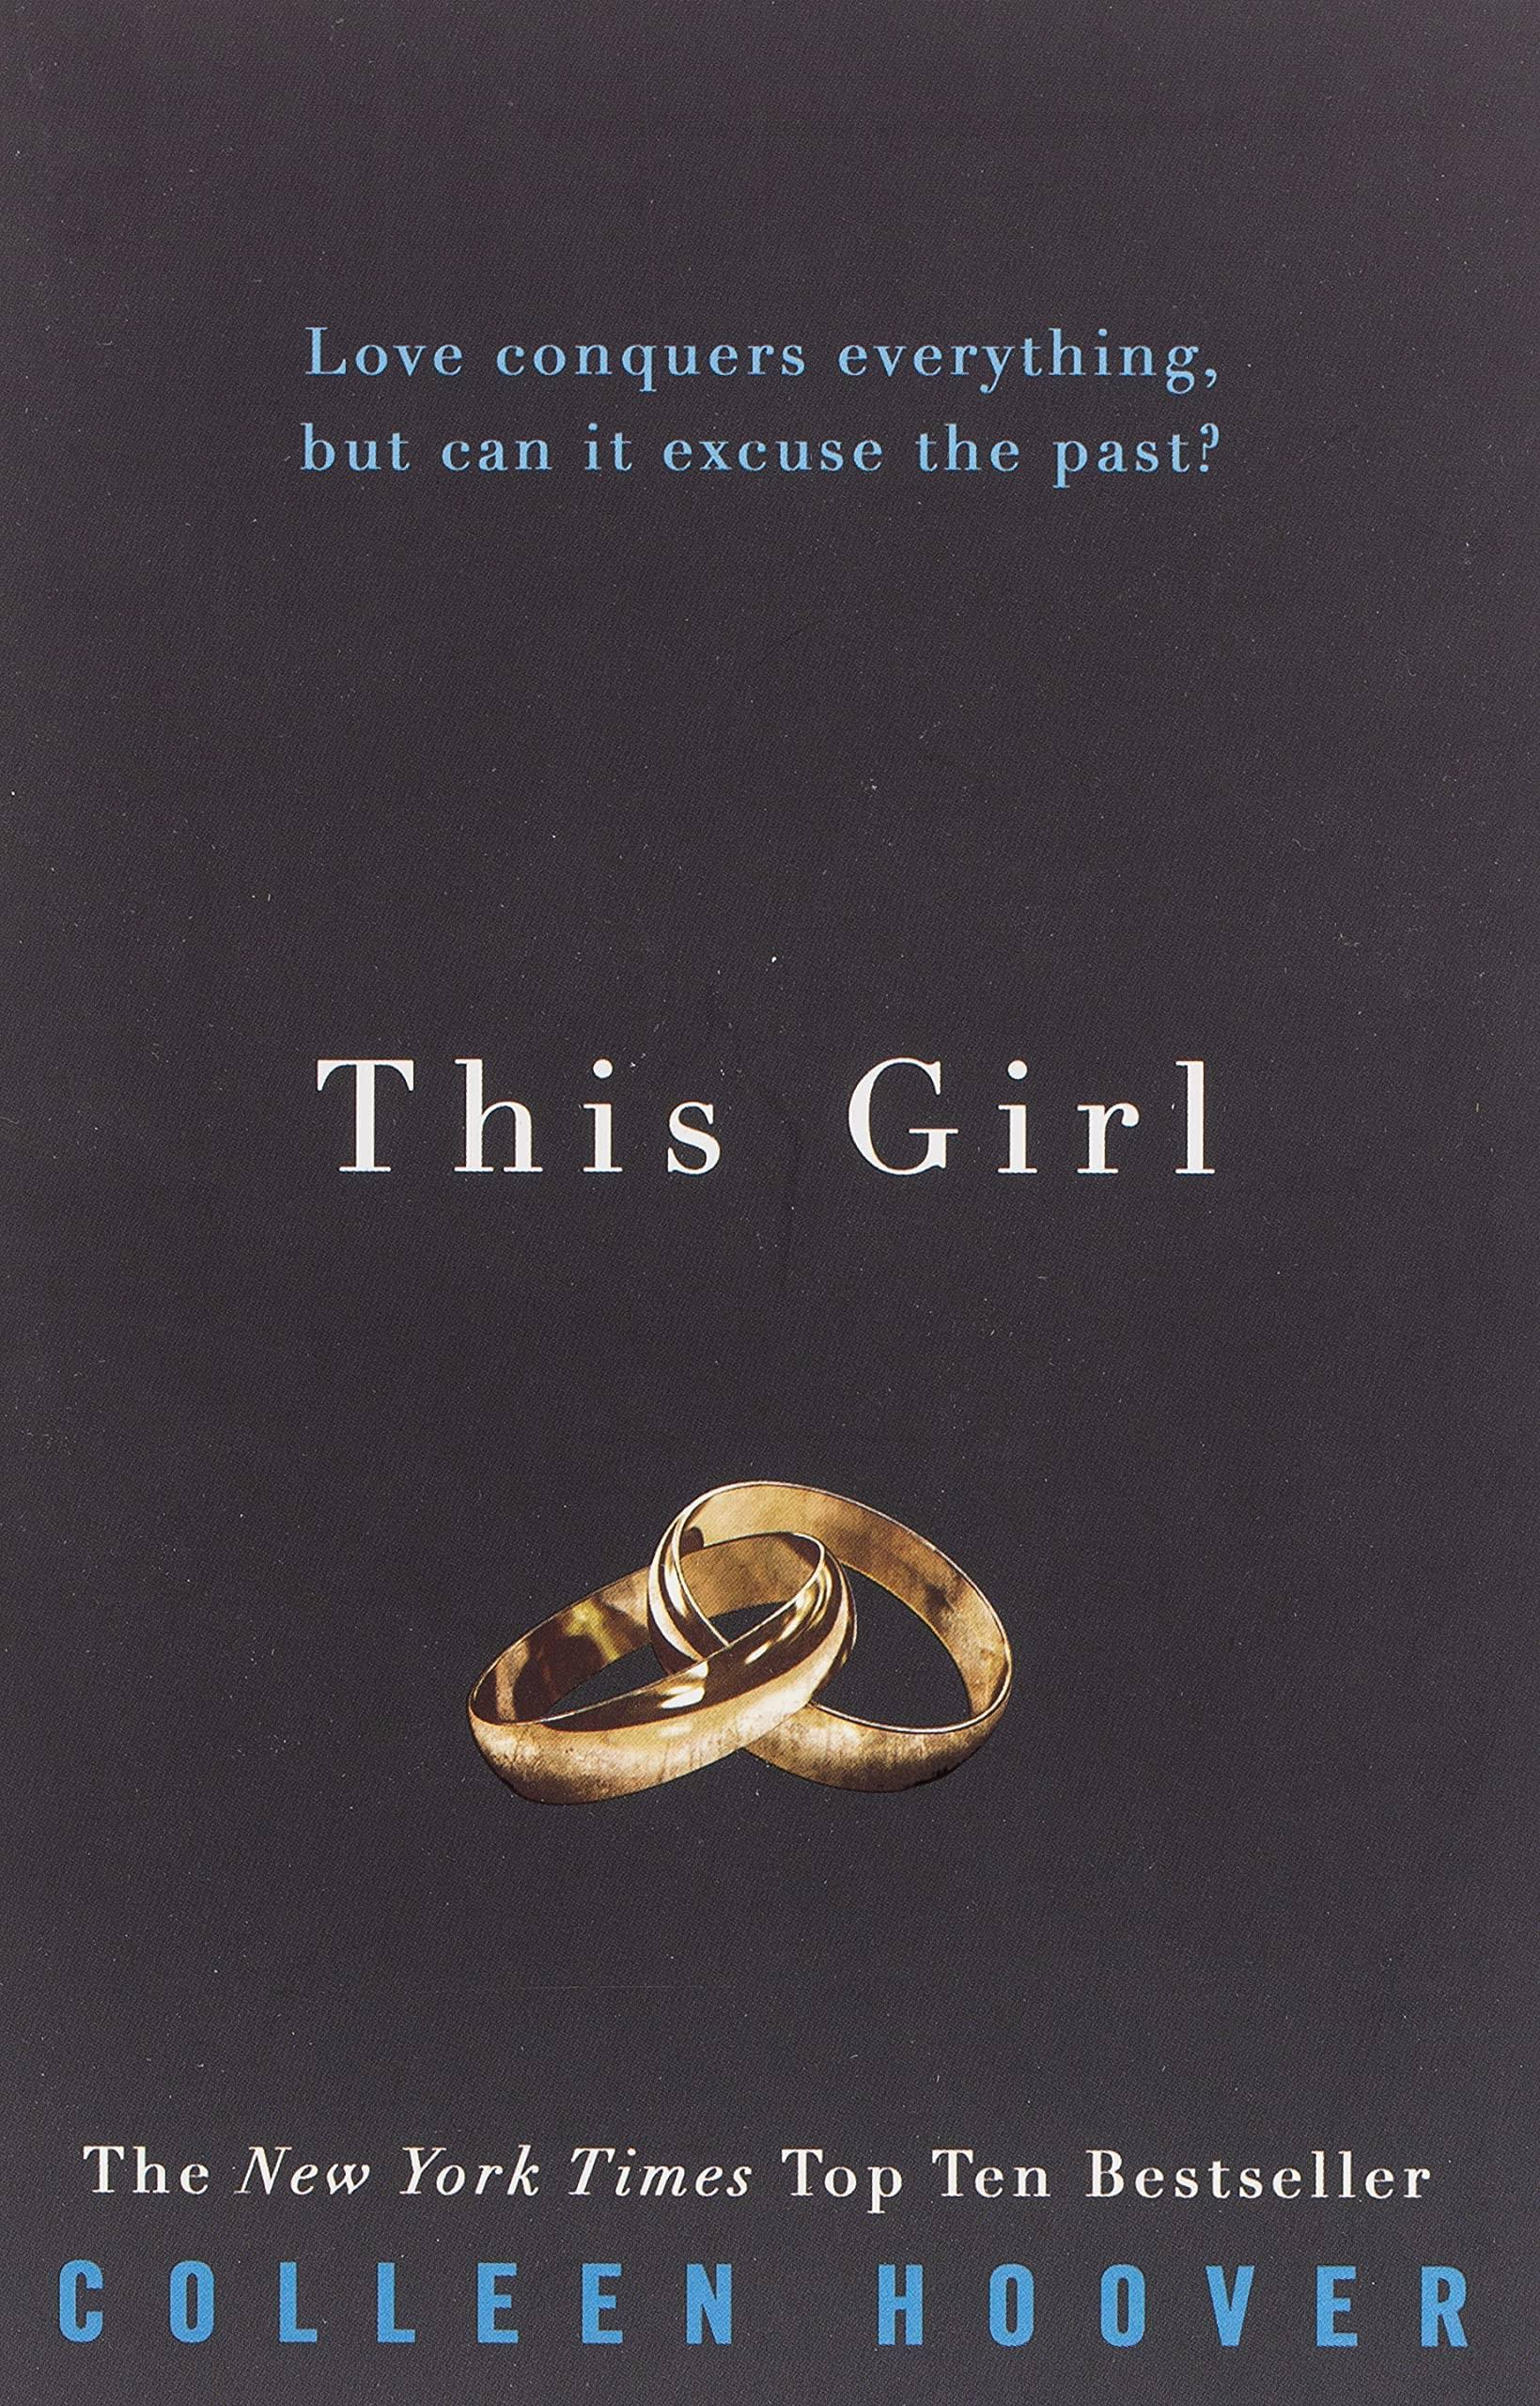 This Girl [Book]